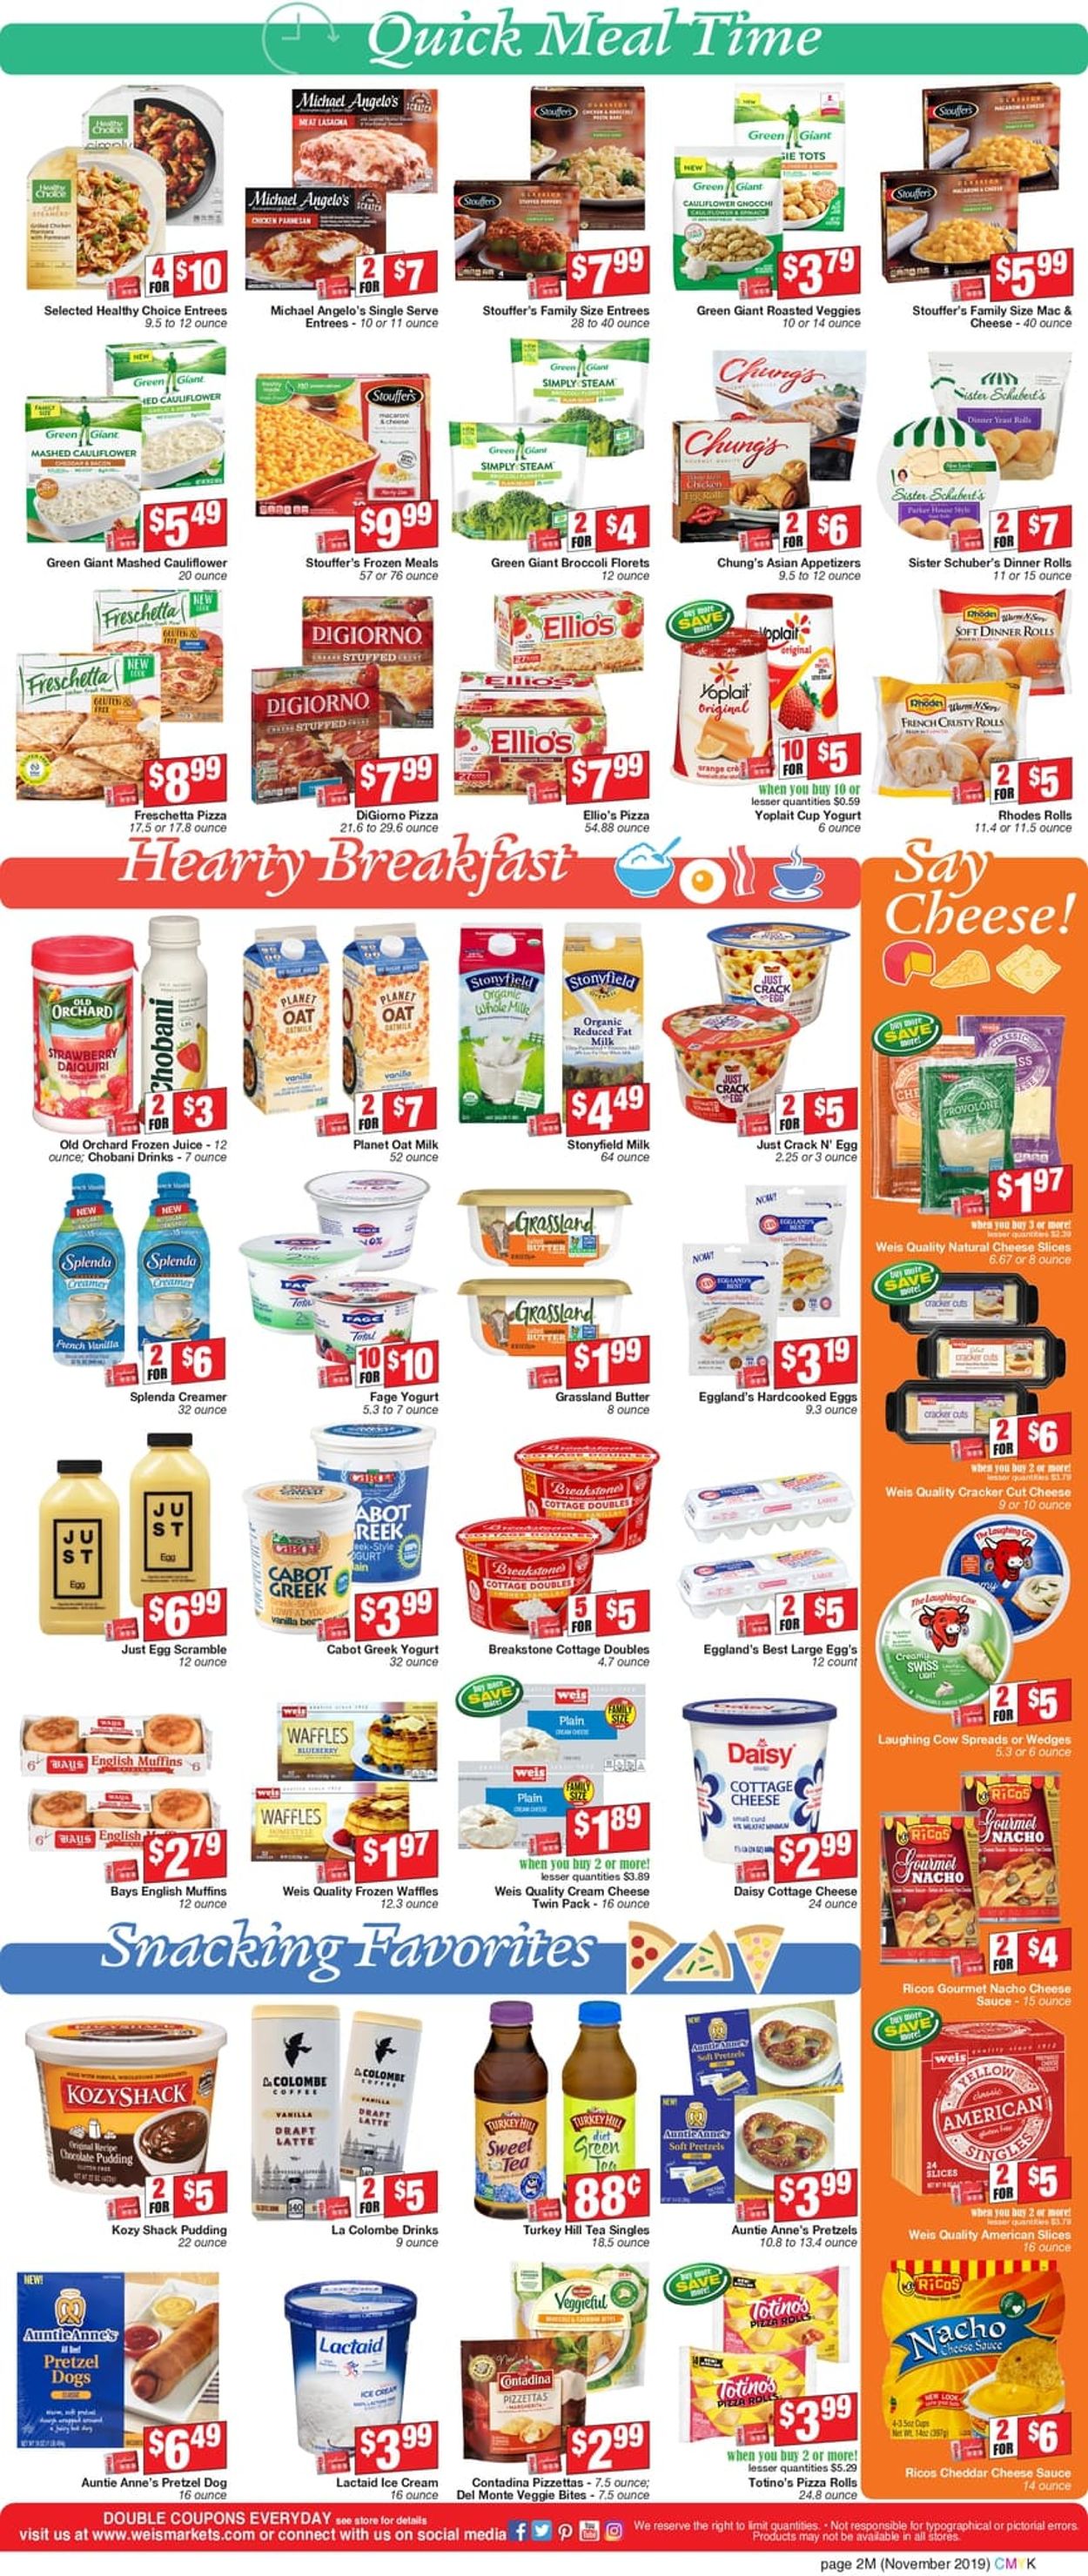 Catalogue Weis from 10/31/2019